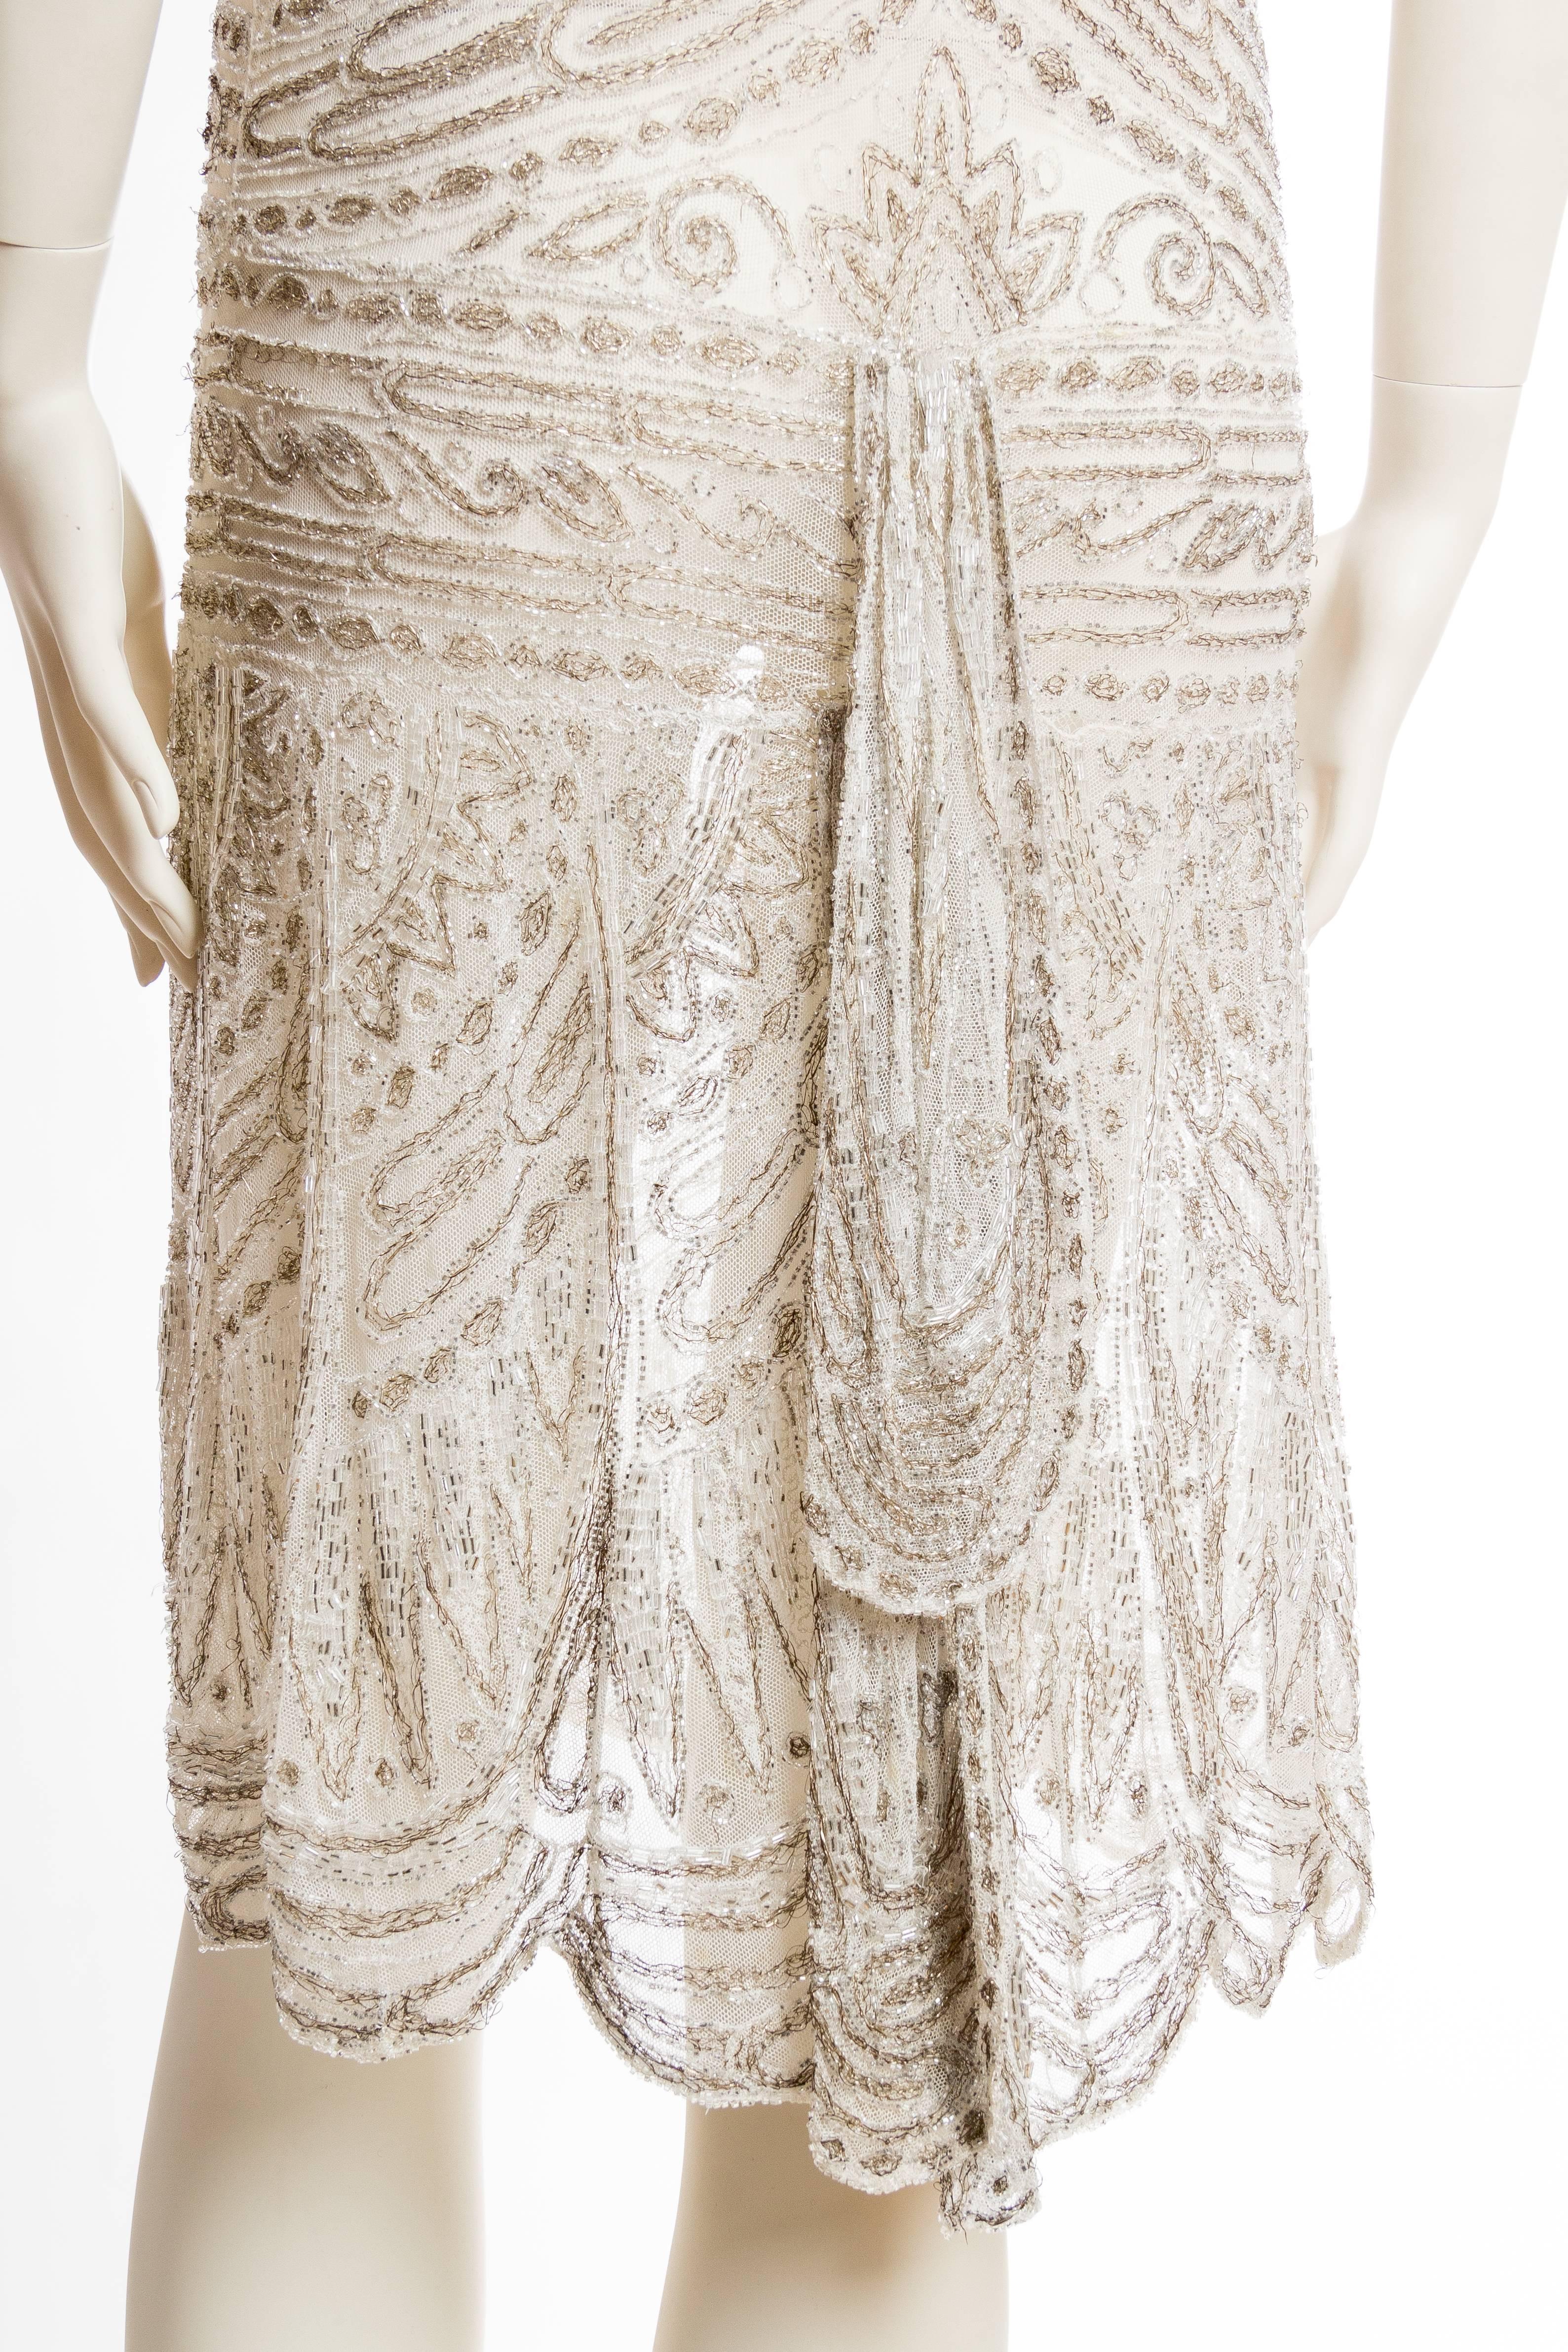 1920s Beaded Net Dress Embroidered with Silver Threads 5